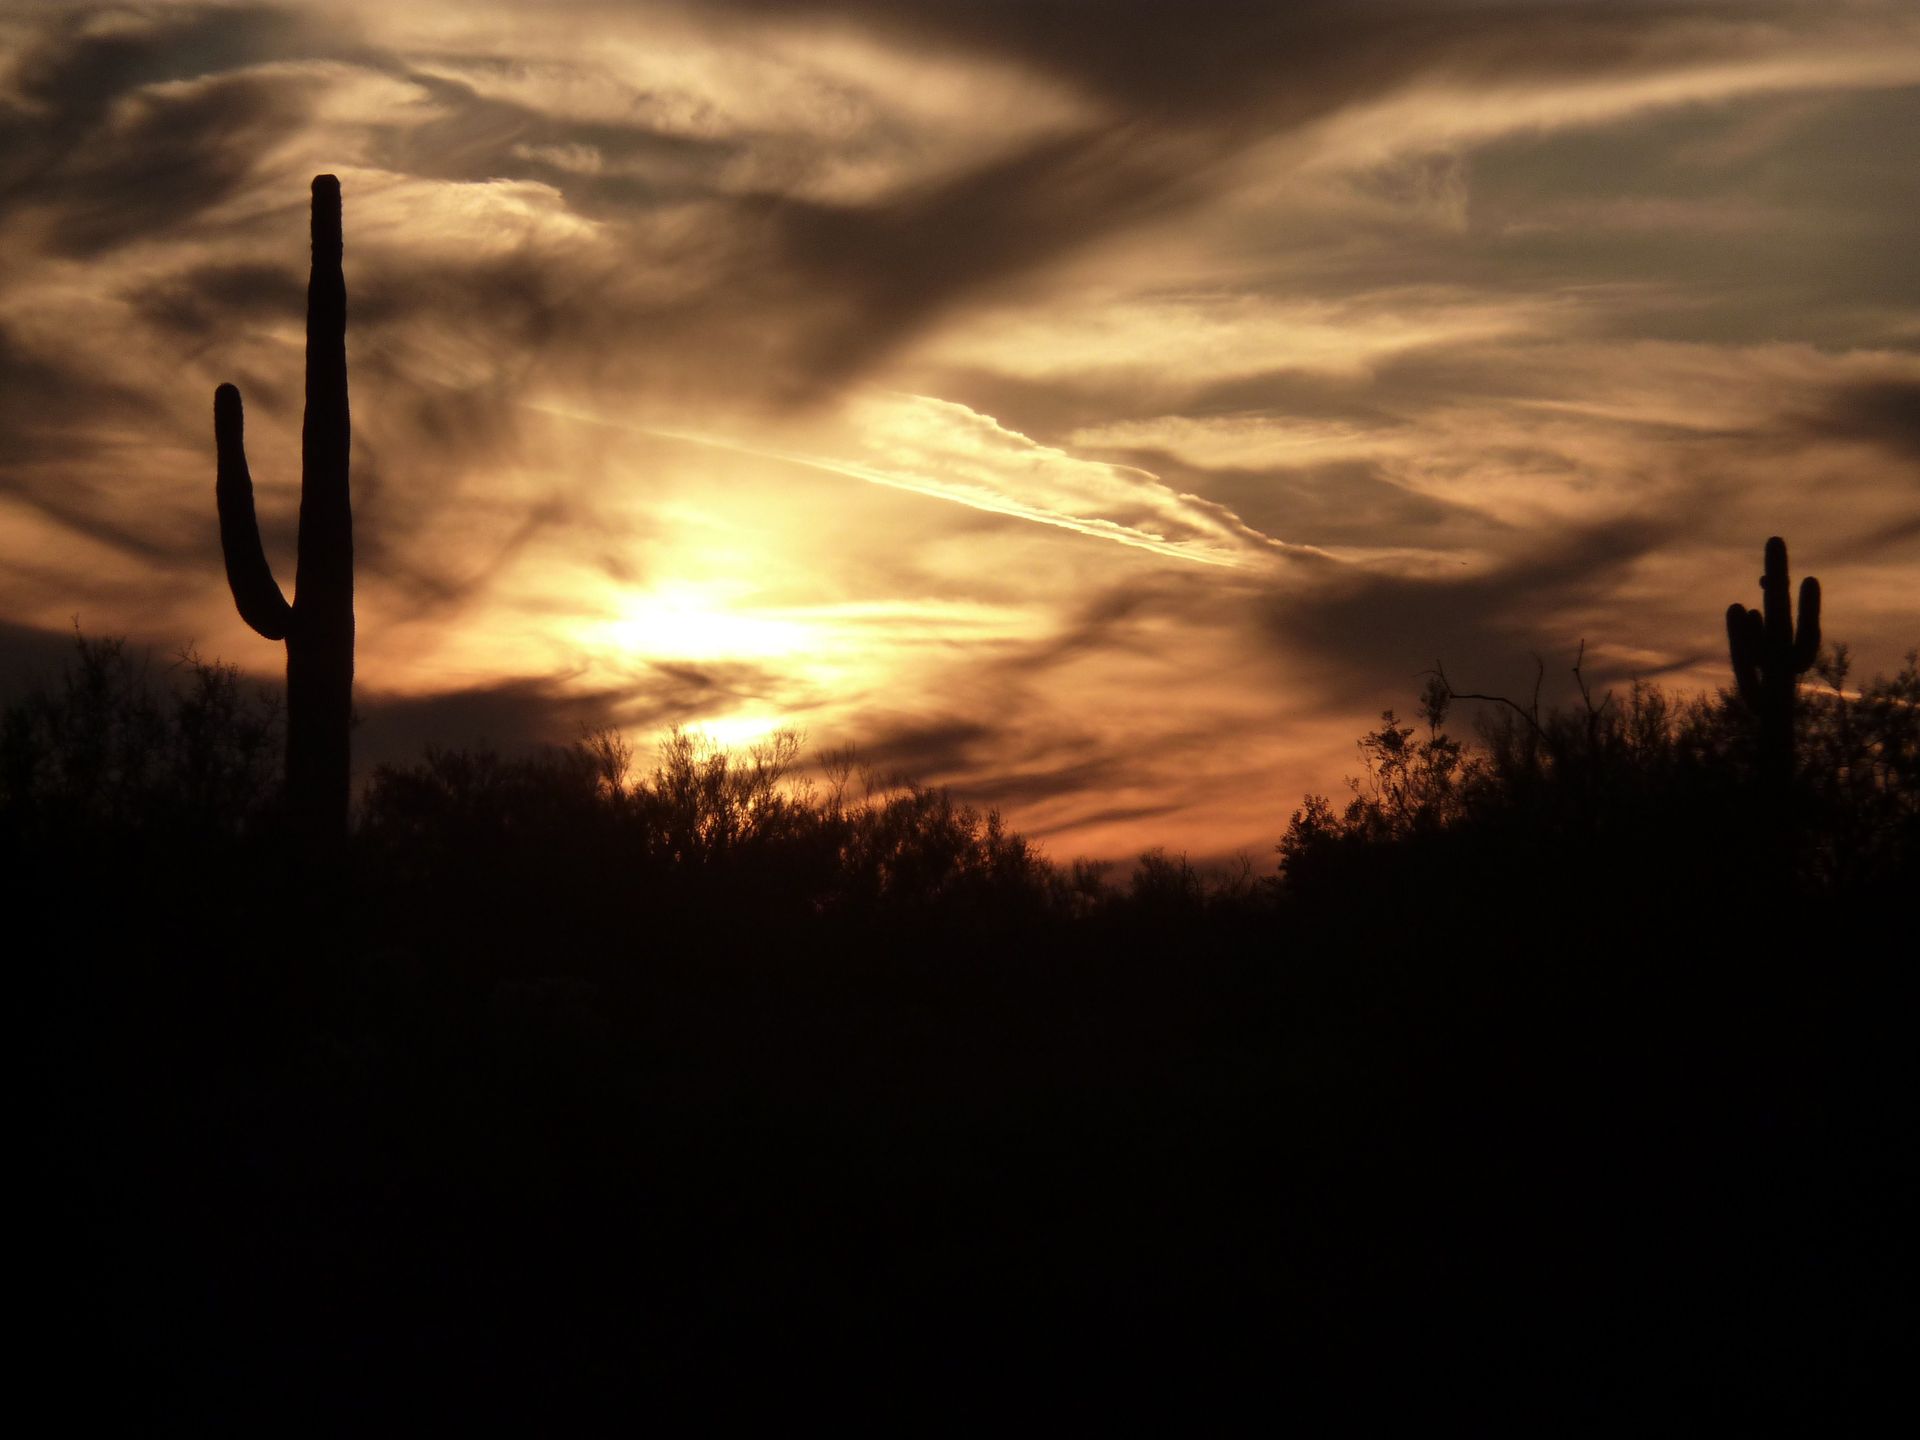 A silhouette of a cactus during sunset.